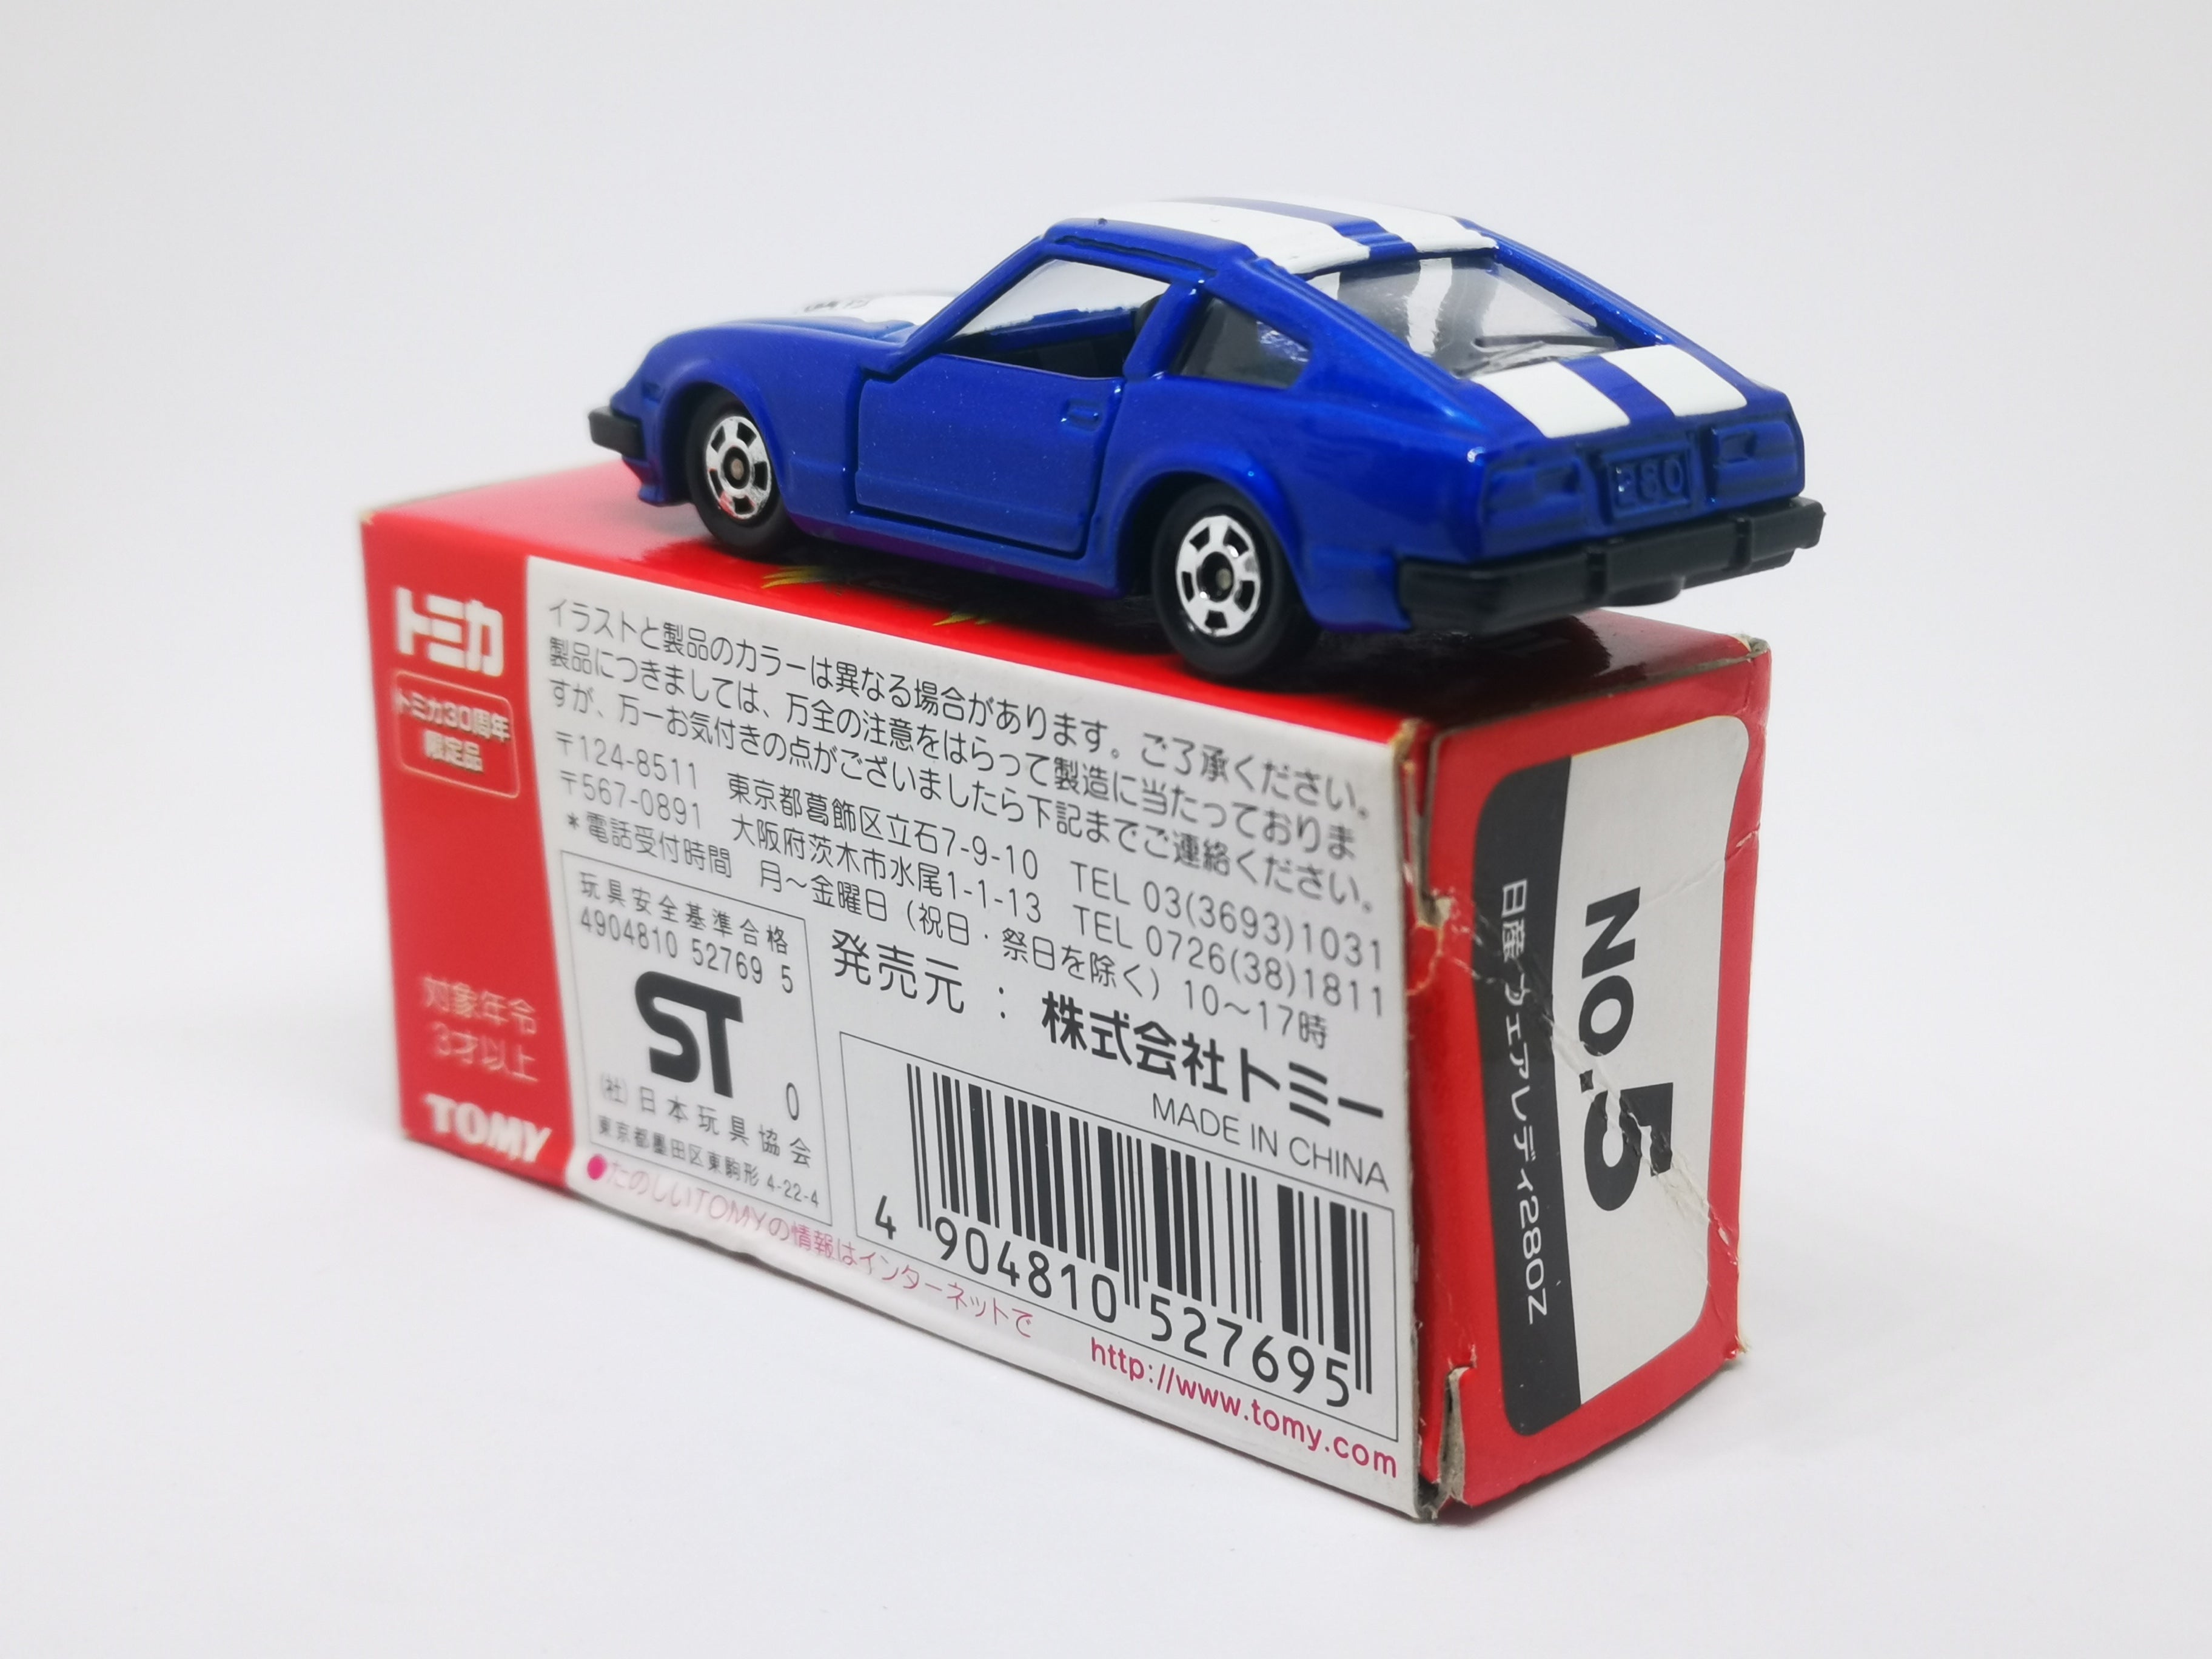 Tomica 30th Anniversary Exclusive #5 Nissan Fairlady 280Z